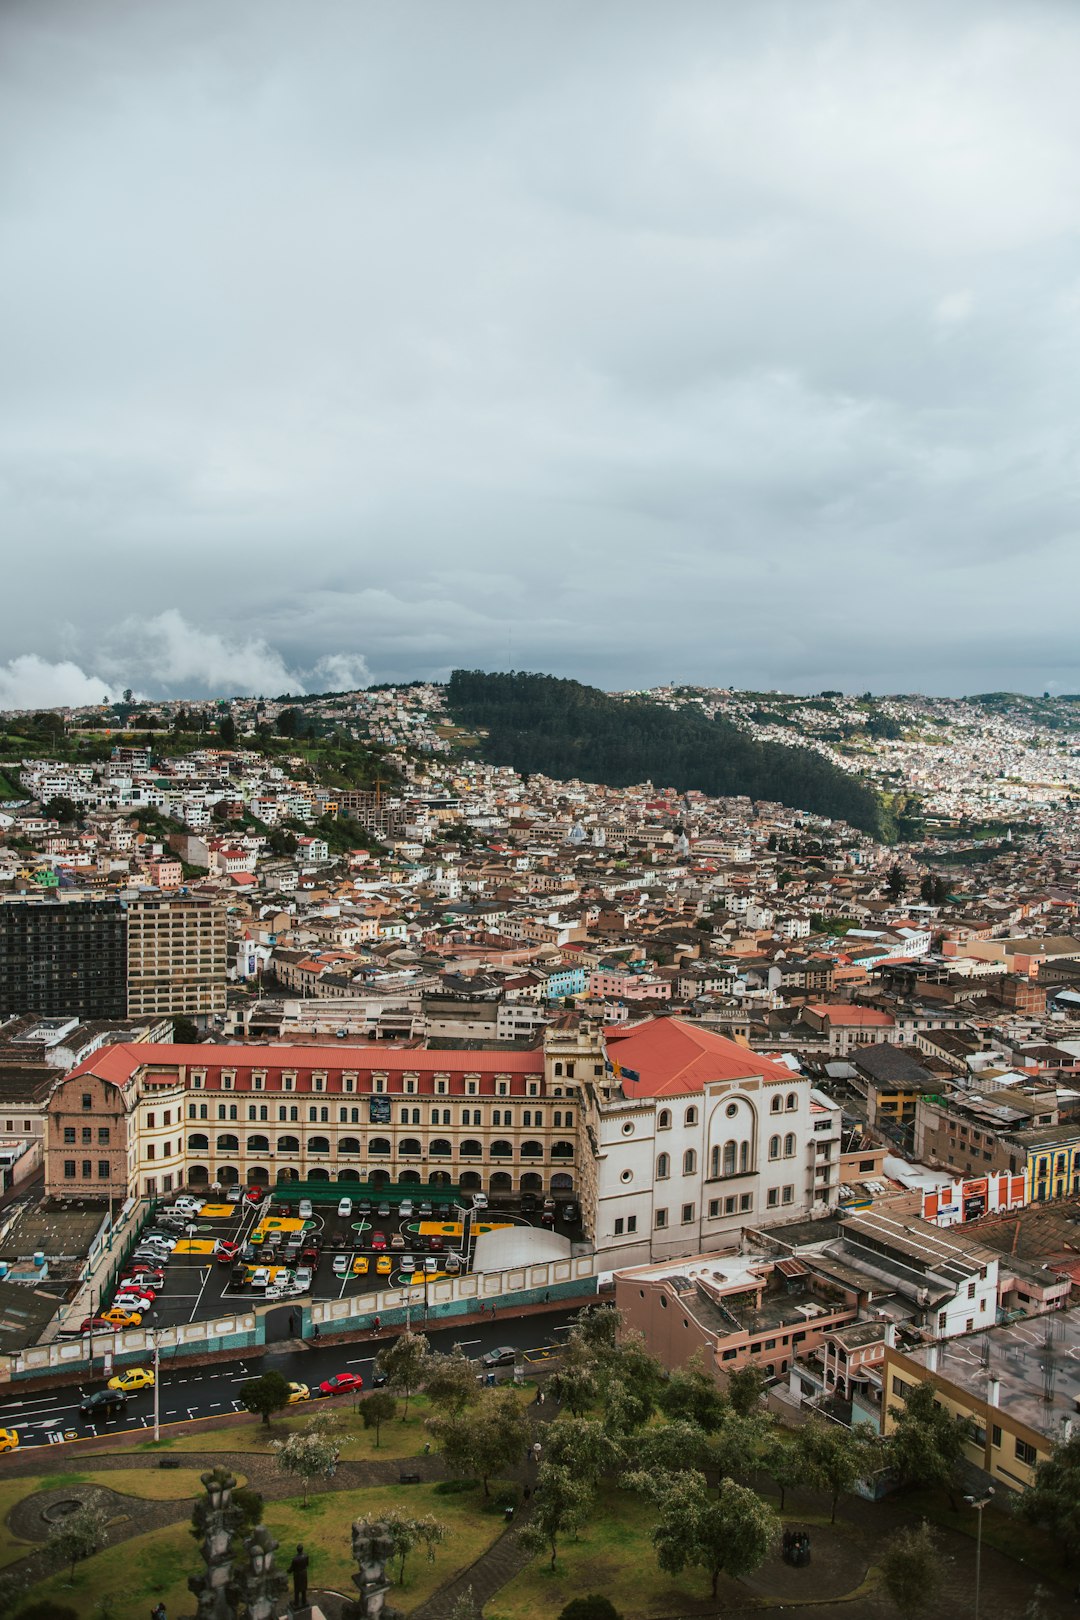 Travel Tips and Stories of Tena in Ecuador